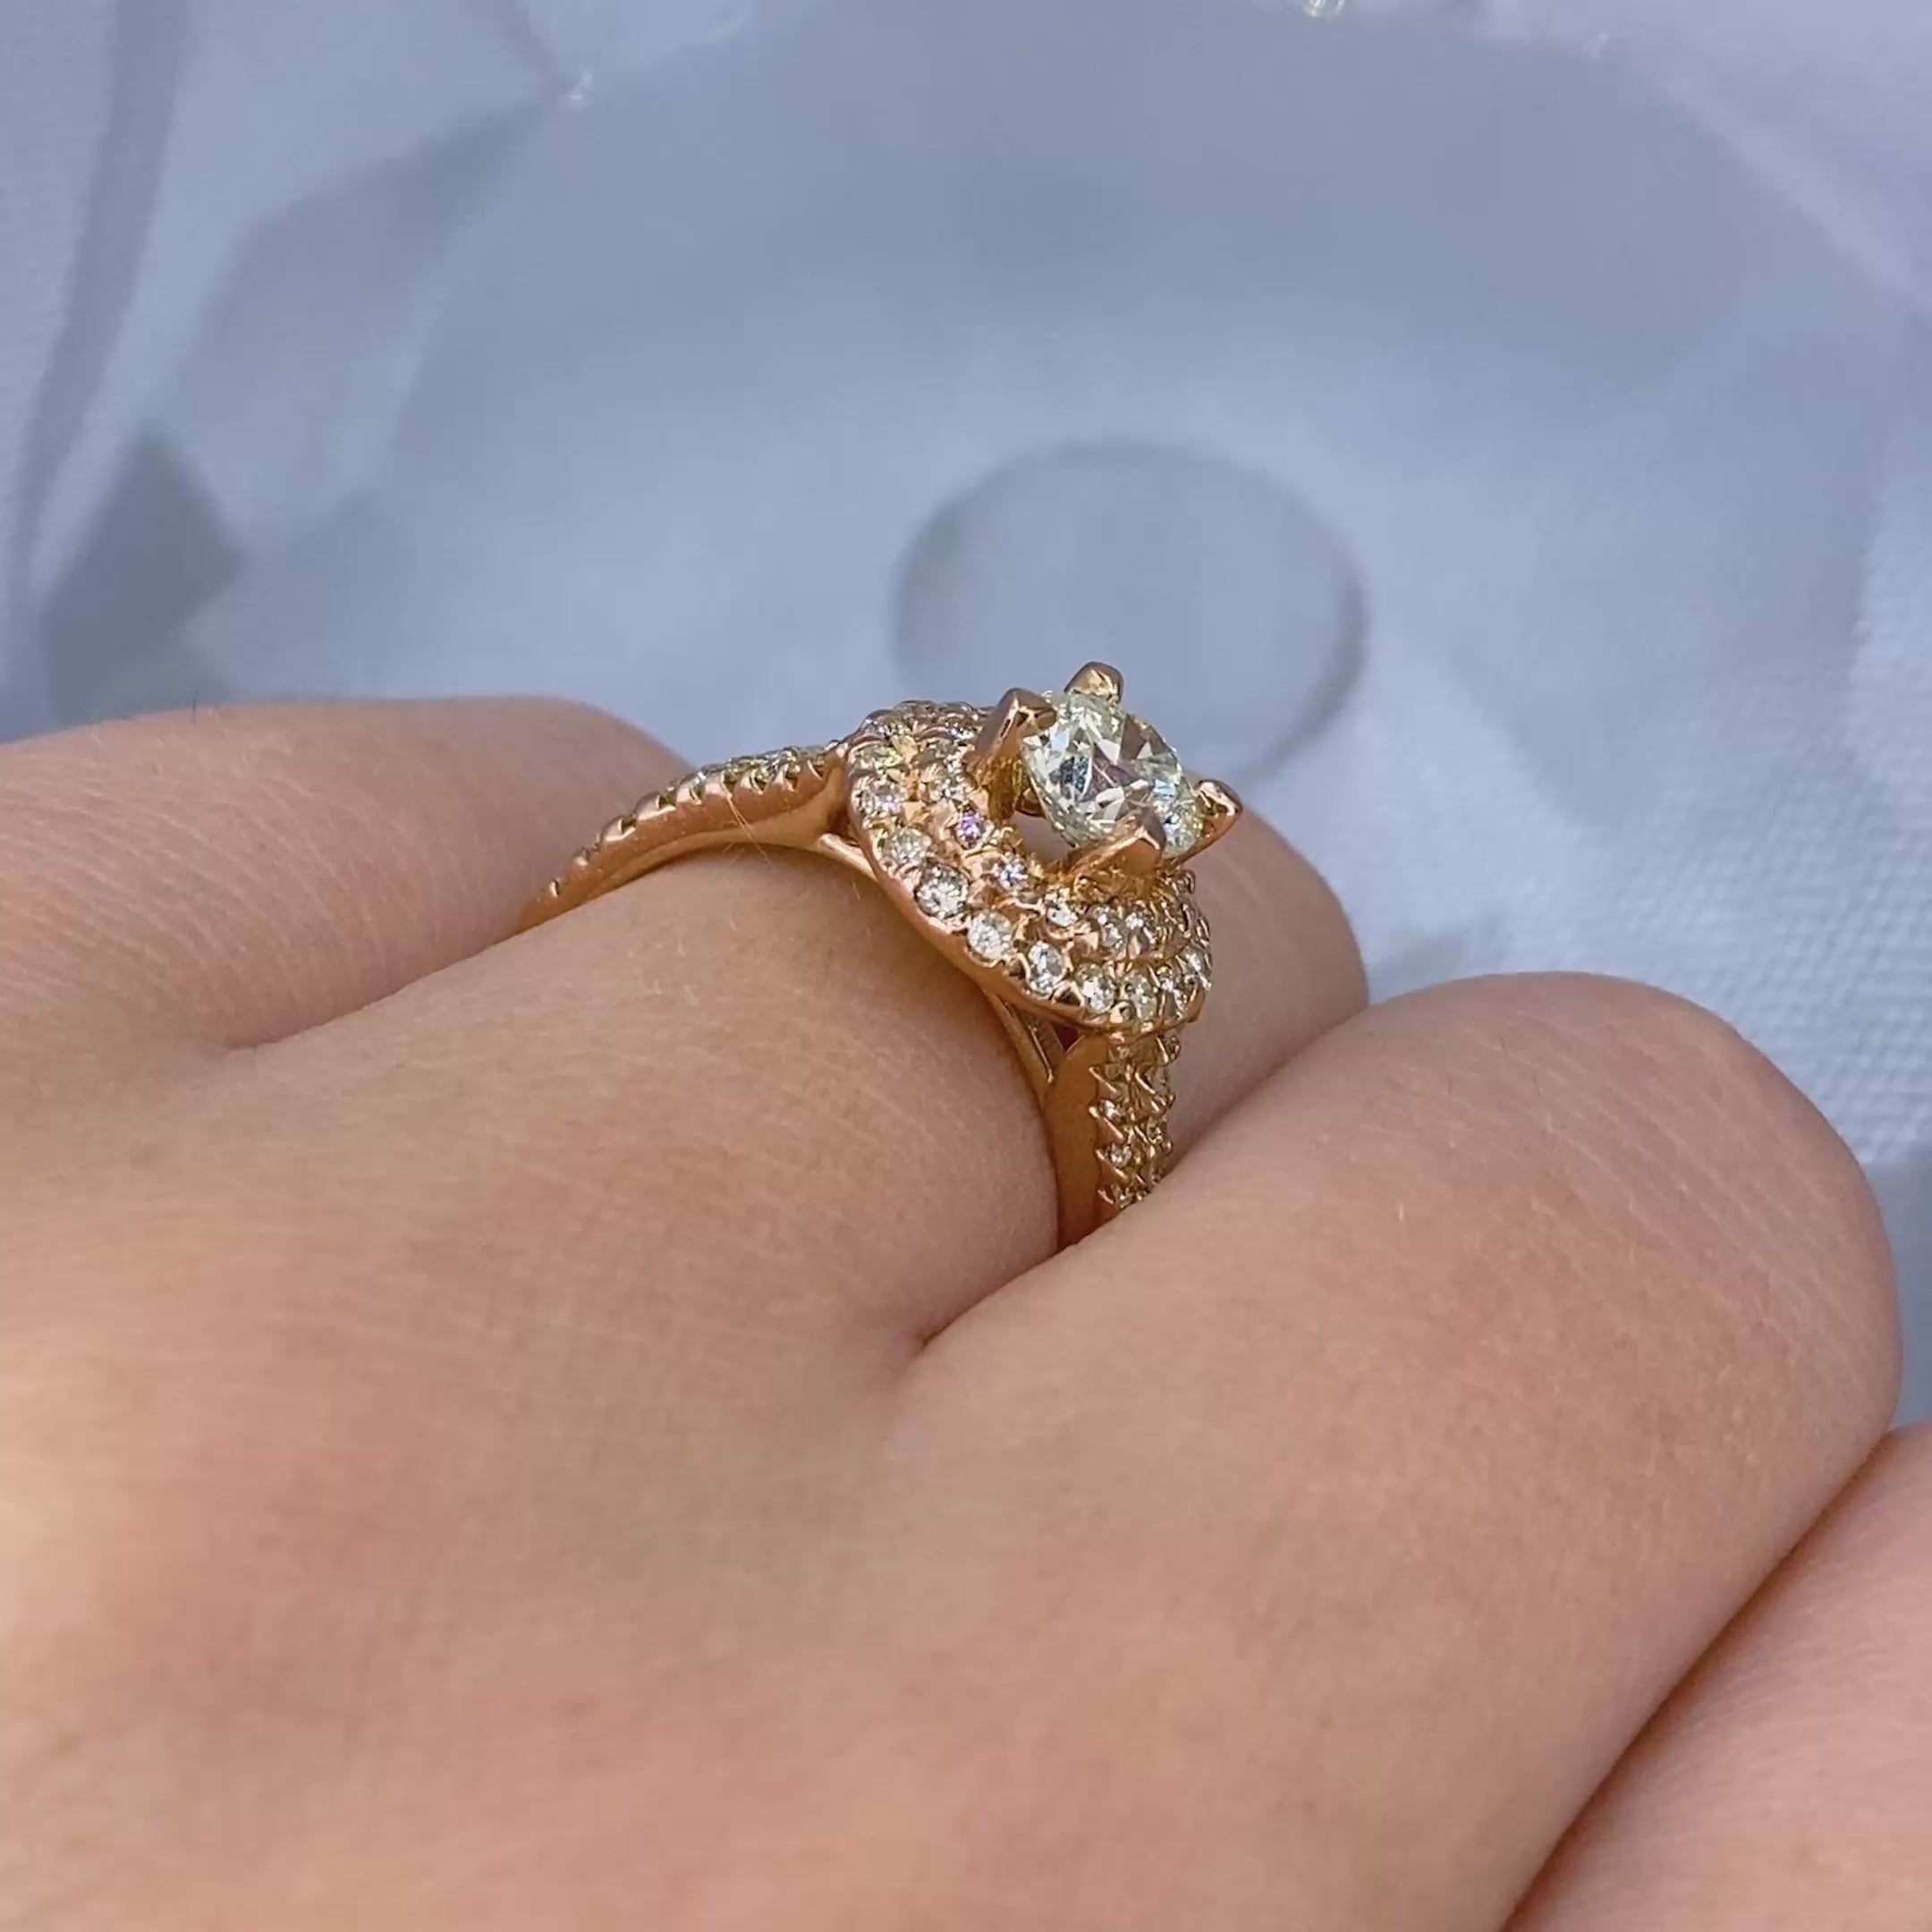 Certified 1.30CT Round Cut Diamond Engagement Ring in 14kt Rose Gold